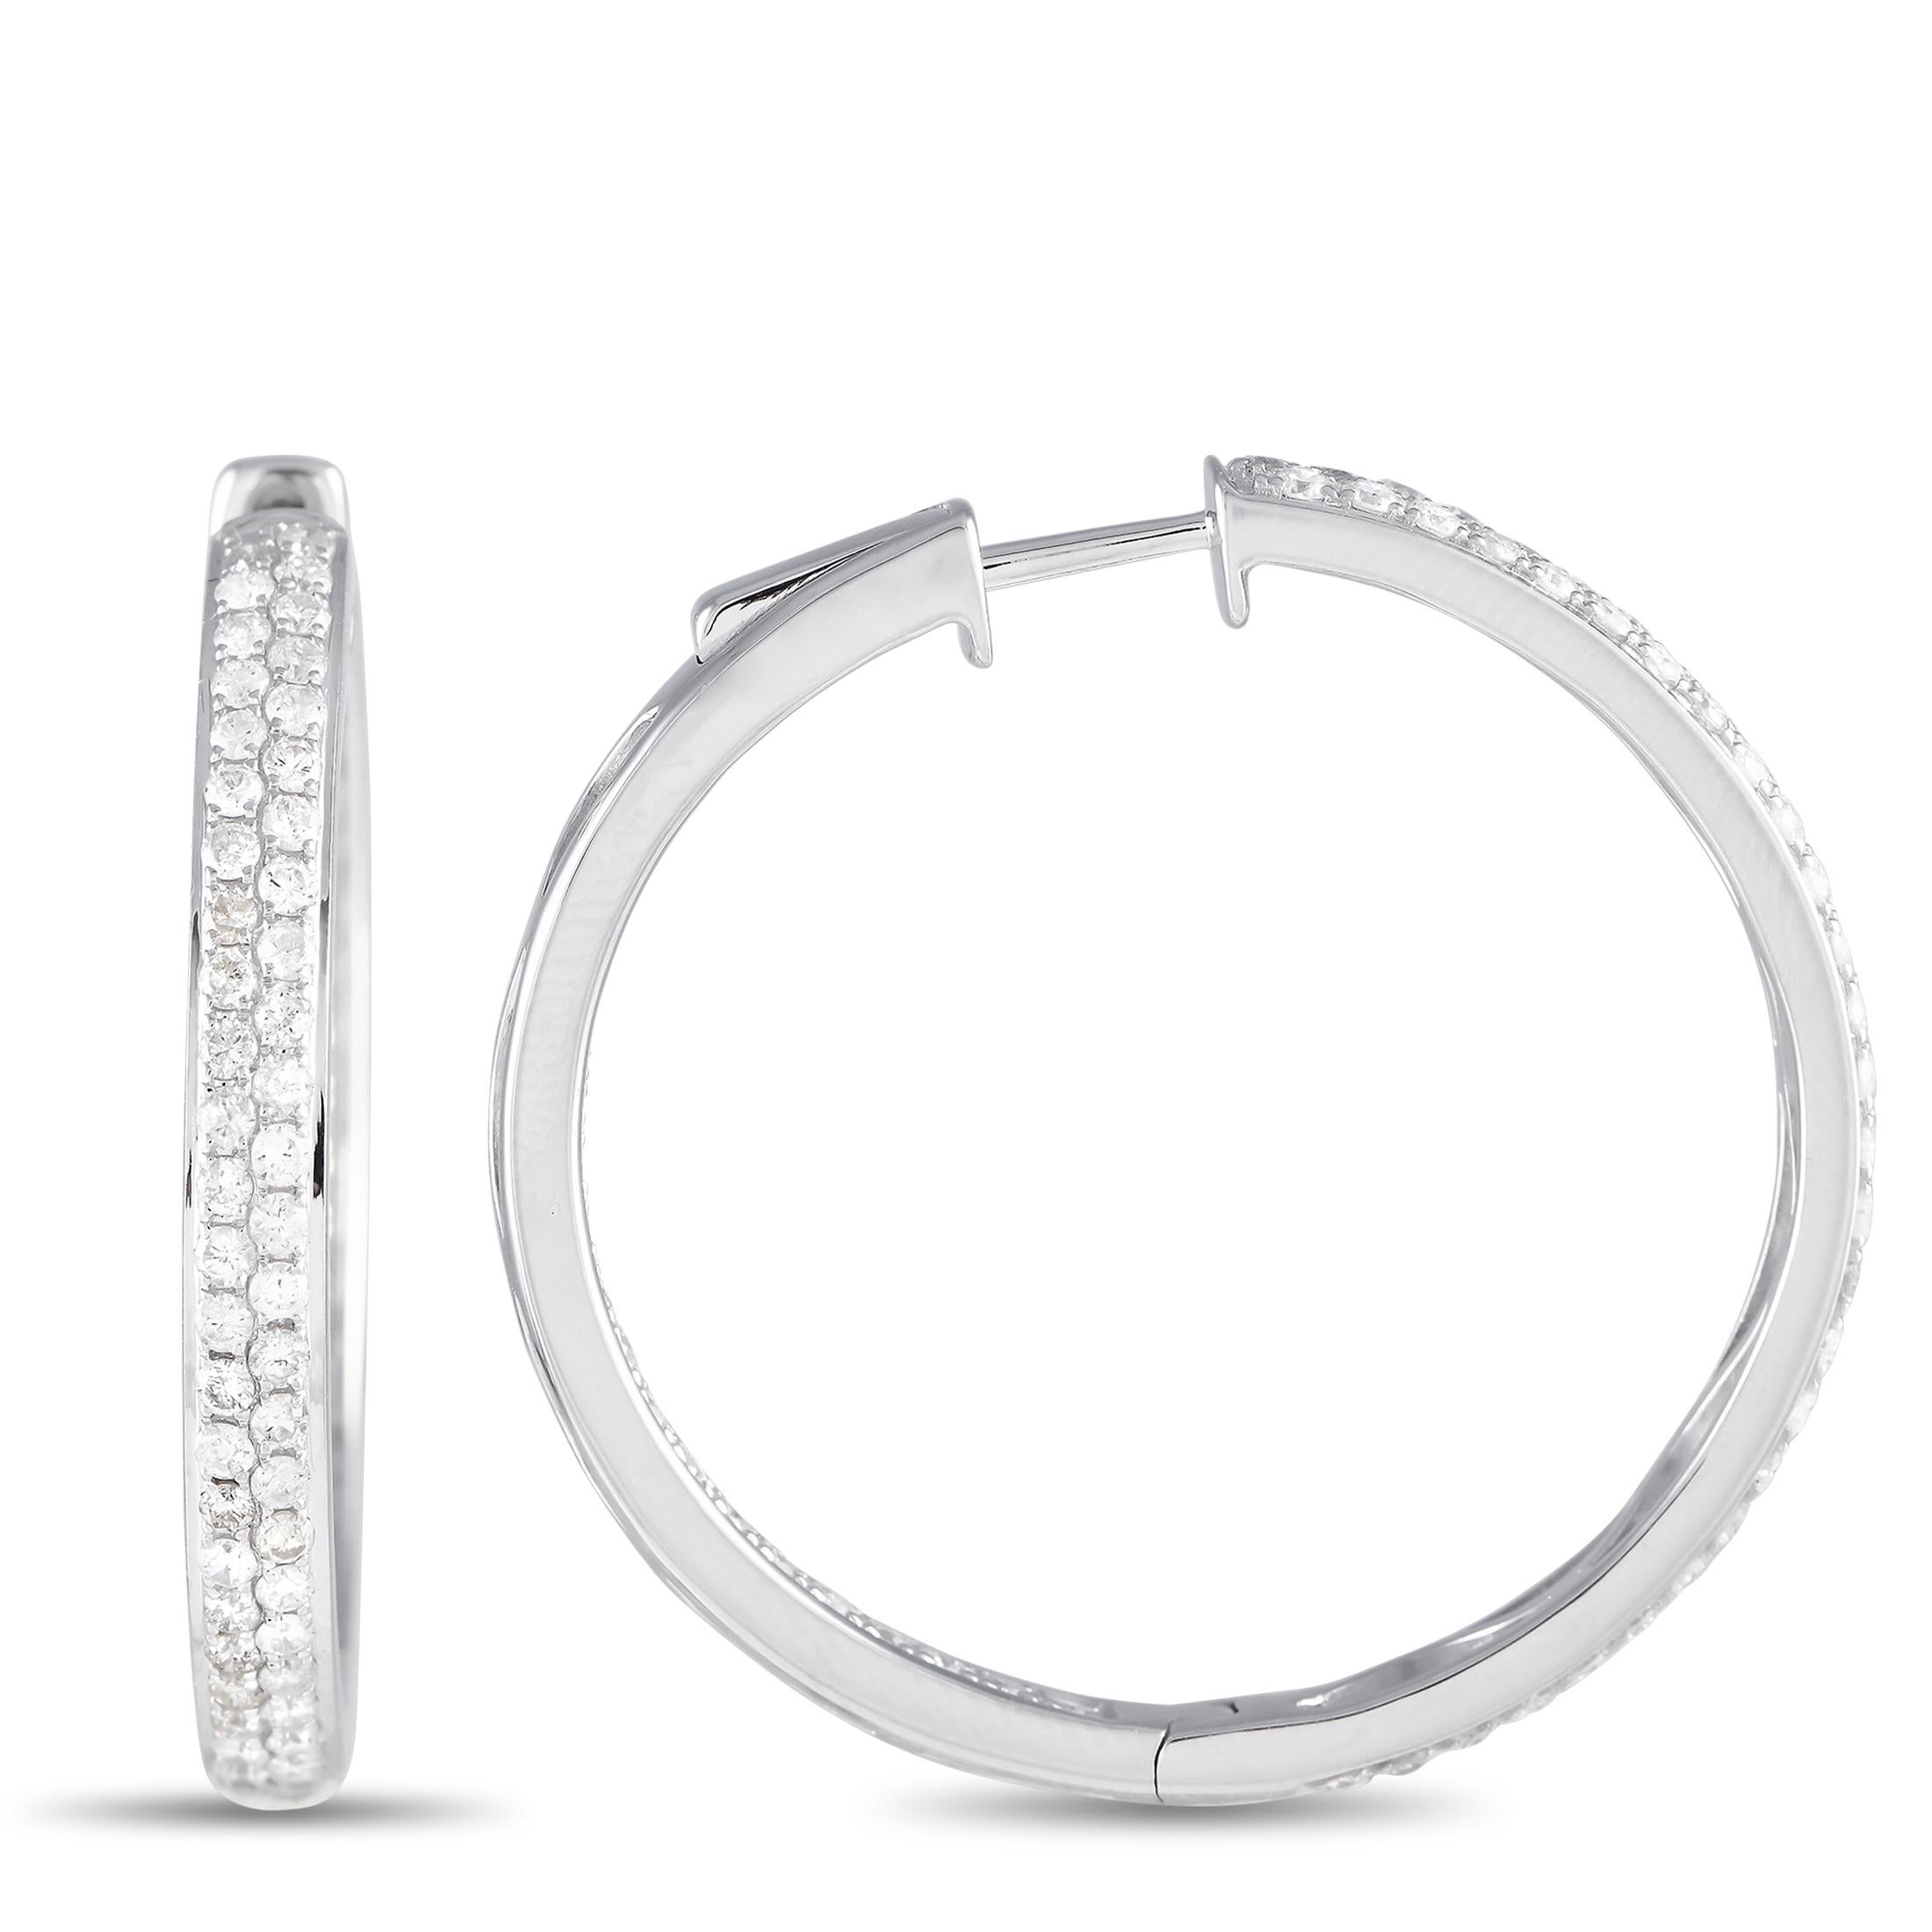 Look and feel more put together with this pair of diamond hoop earrings. Crafted in 14K white gold, these 1.25-inch hoops has its front exterior and back interior surfaces lined with two rows of round diamonds. Timeless and versatile, this pair of